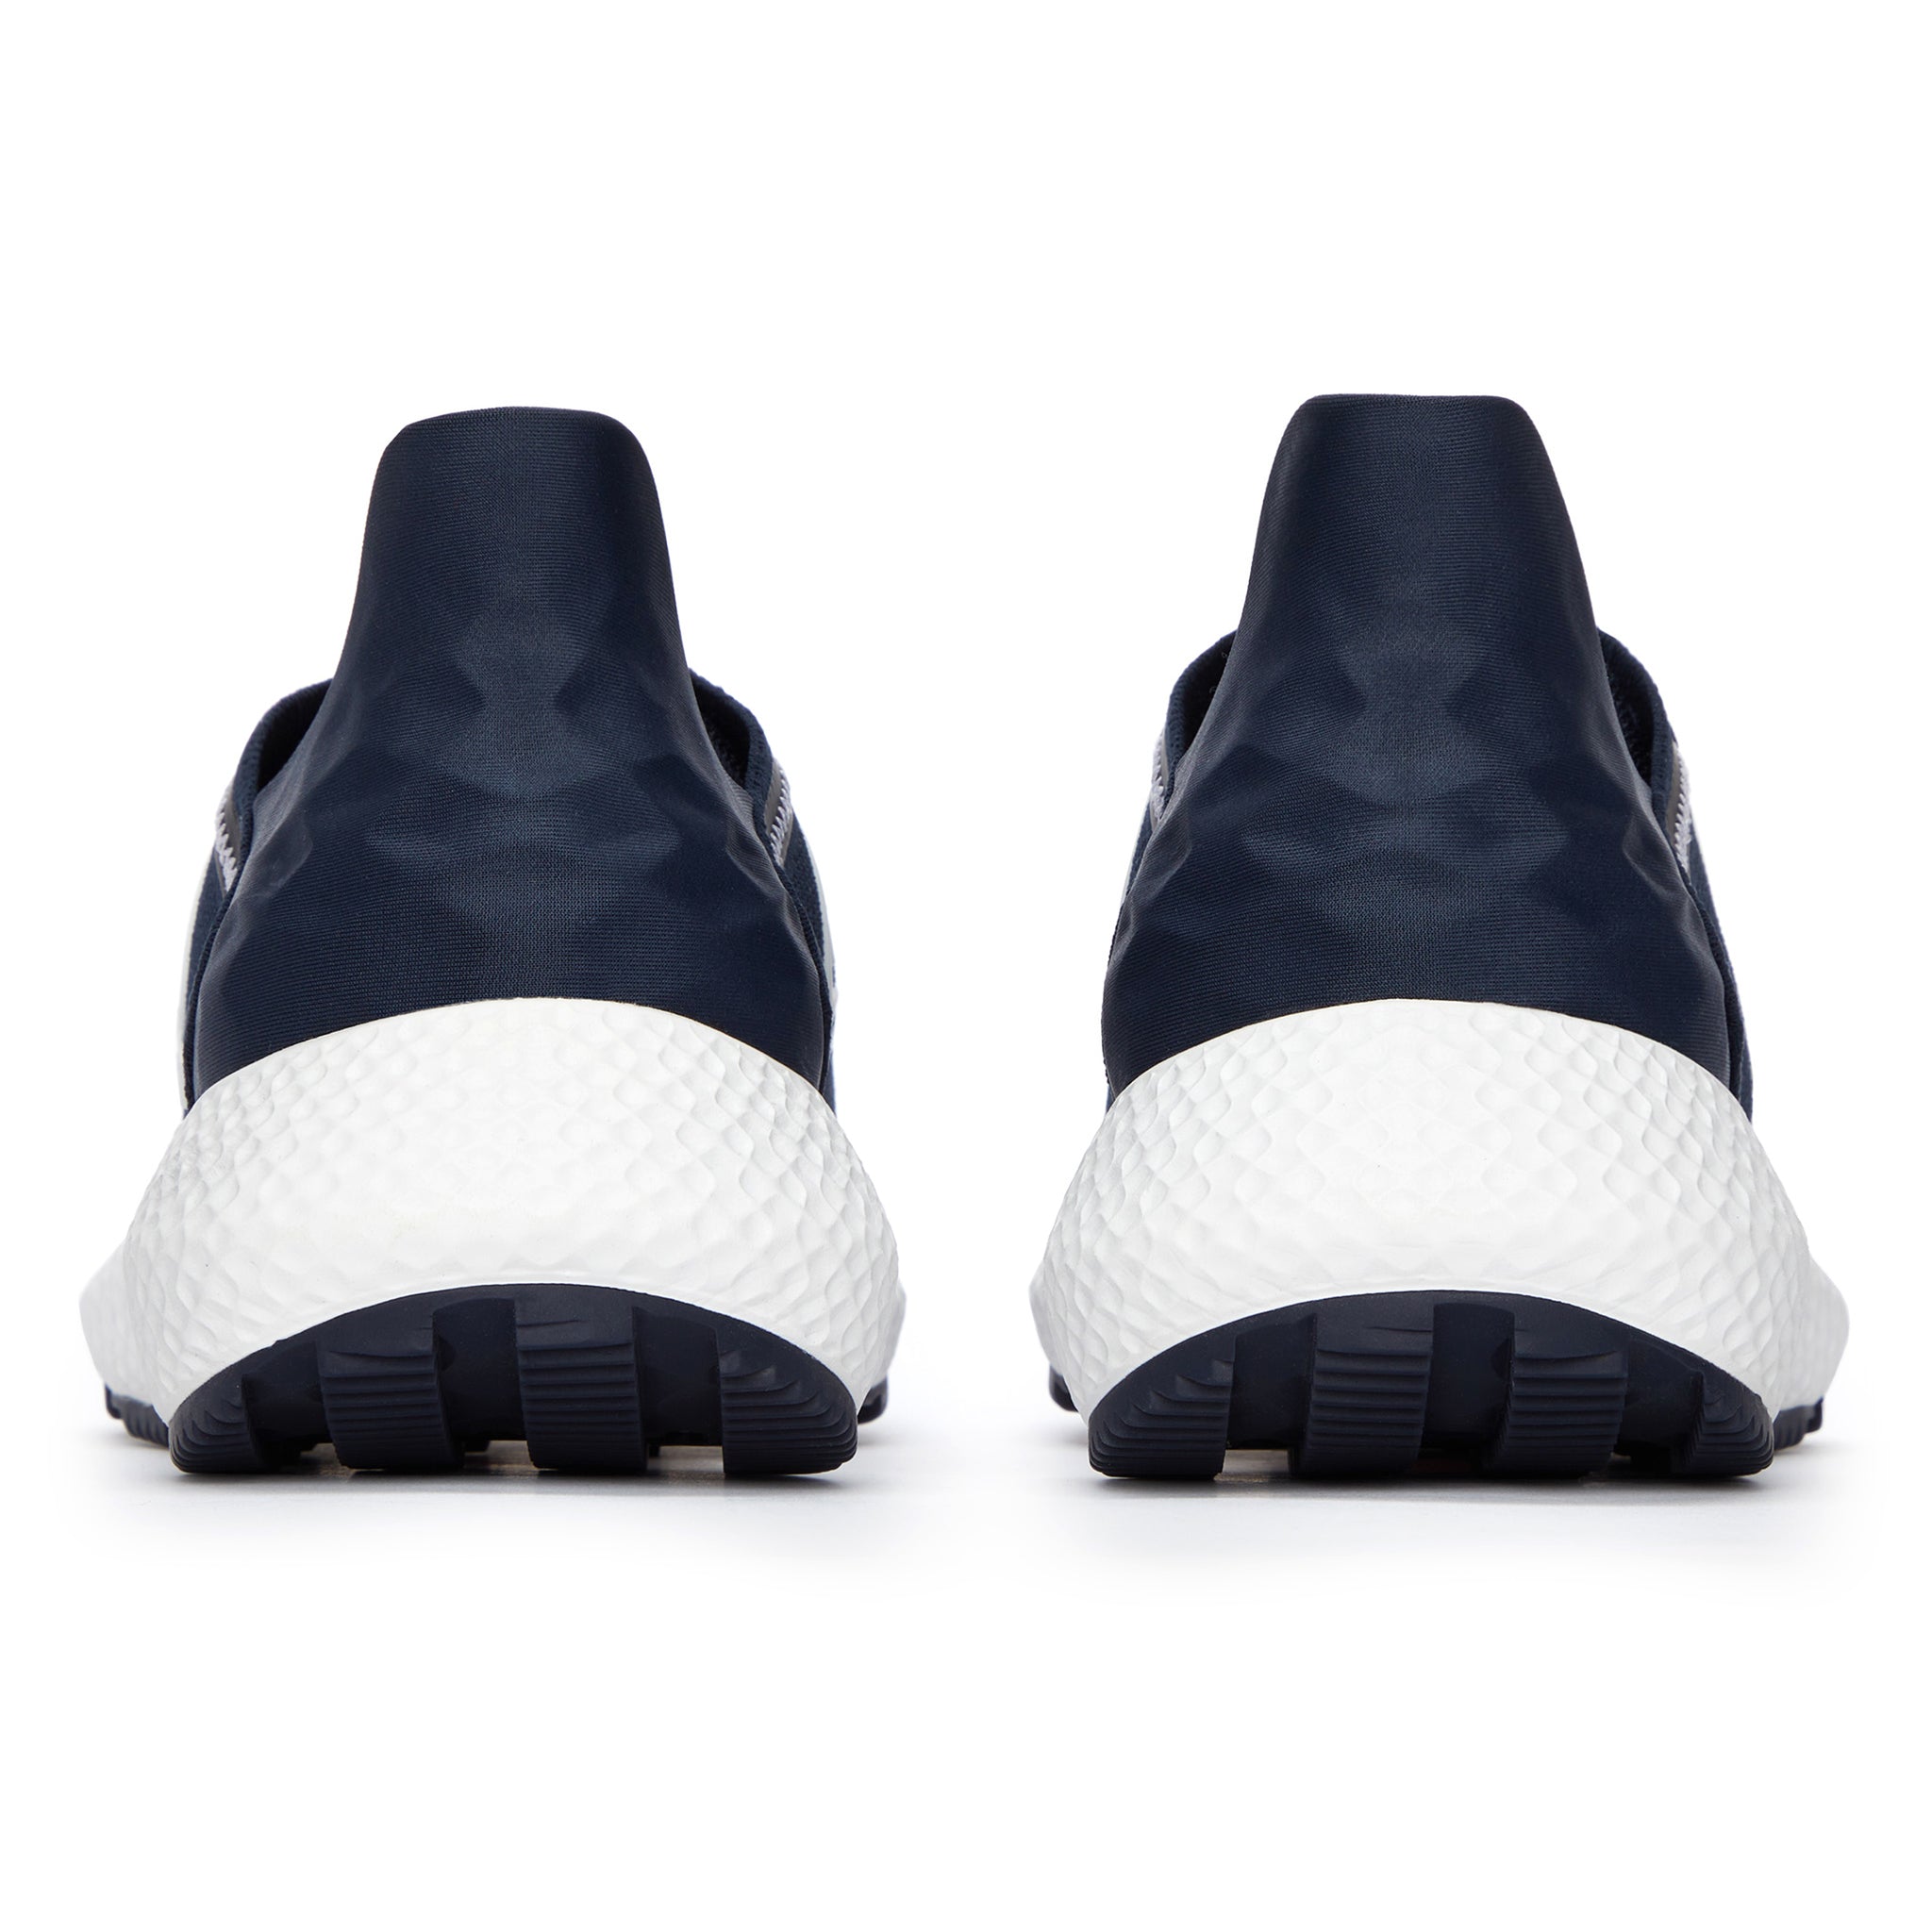 g-fore-mg4x2-cross-golf-shoes-gmf000042-twilight